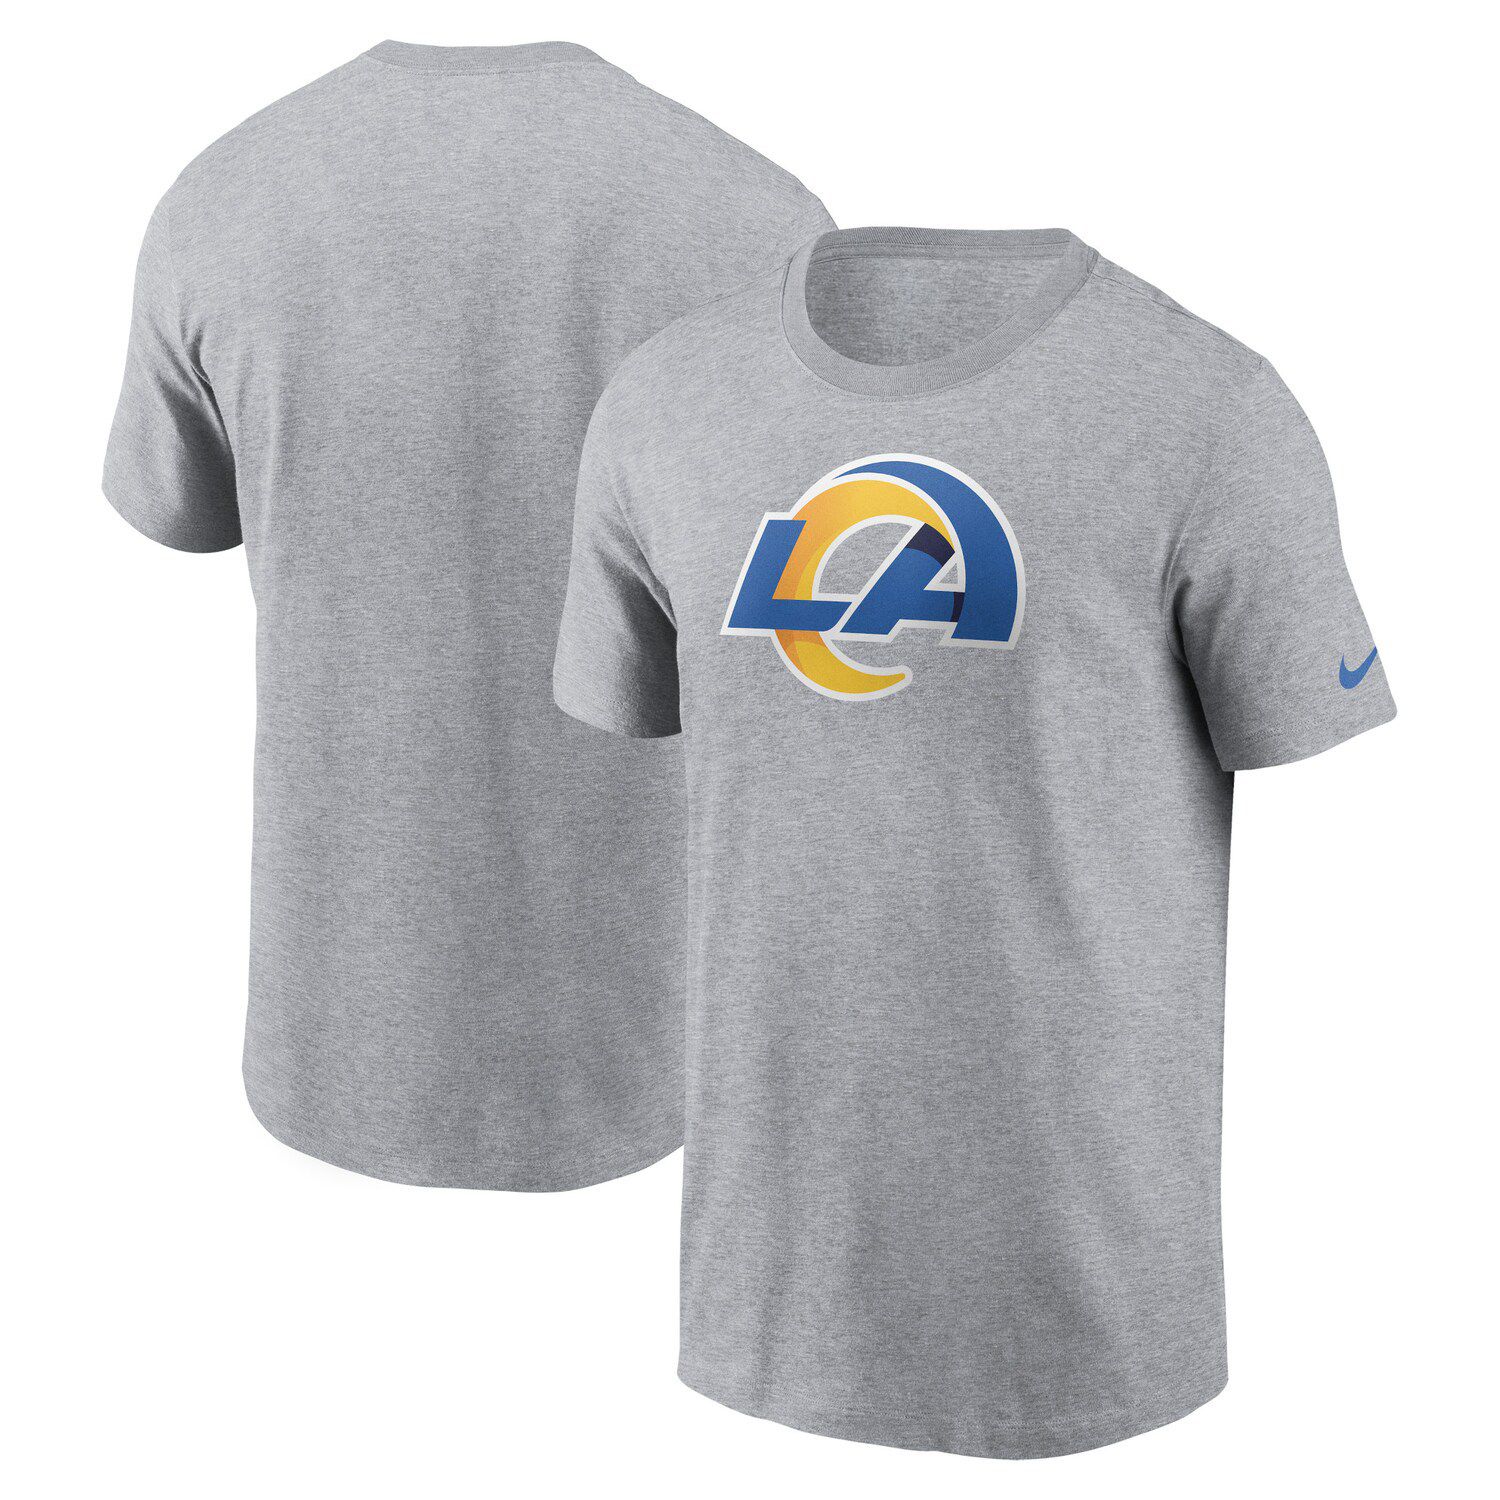 Outerstuff Infant Royal Los Angeles Rams Primary Logo T-Shirt